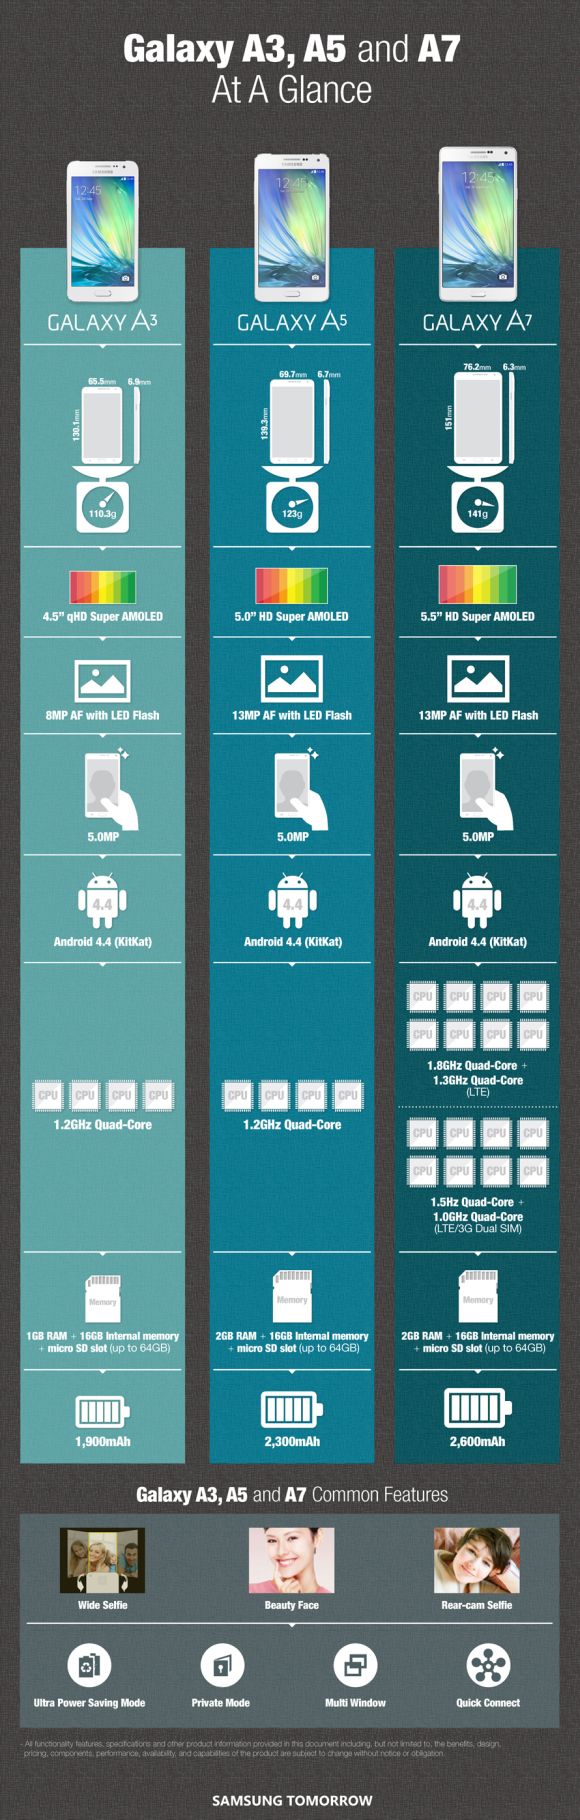 150113-samsung-galaxy-a-series-comparison-full-infographic